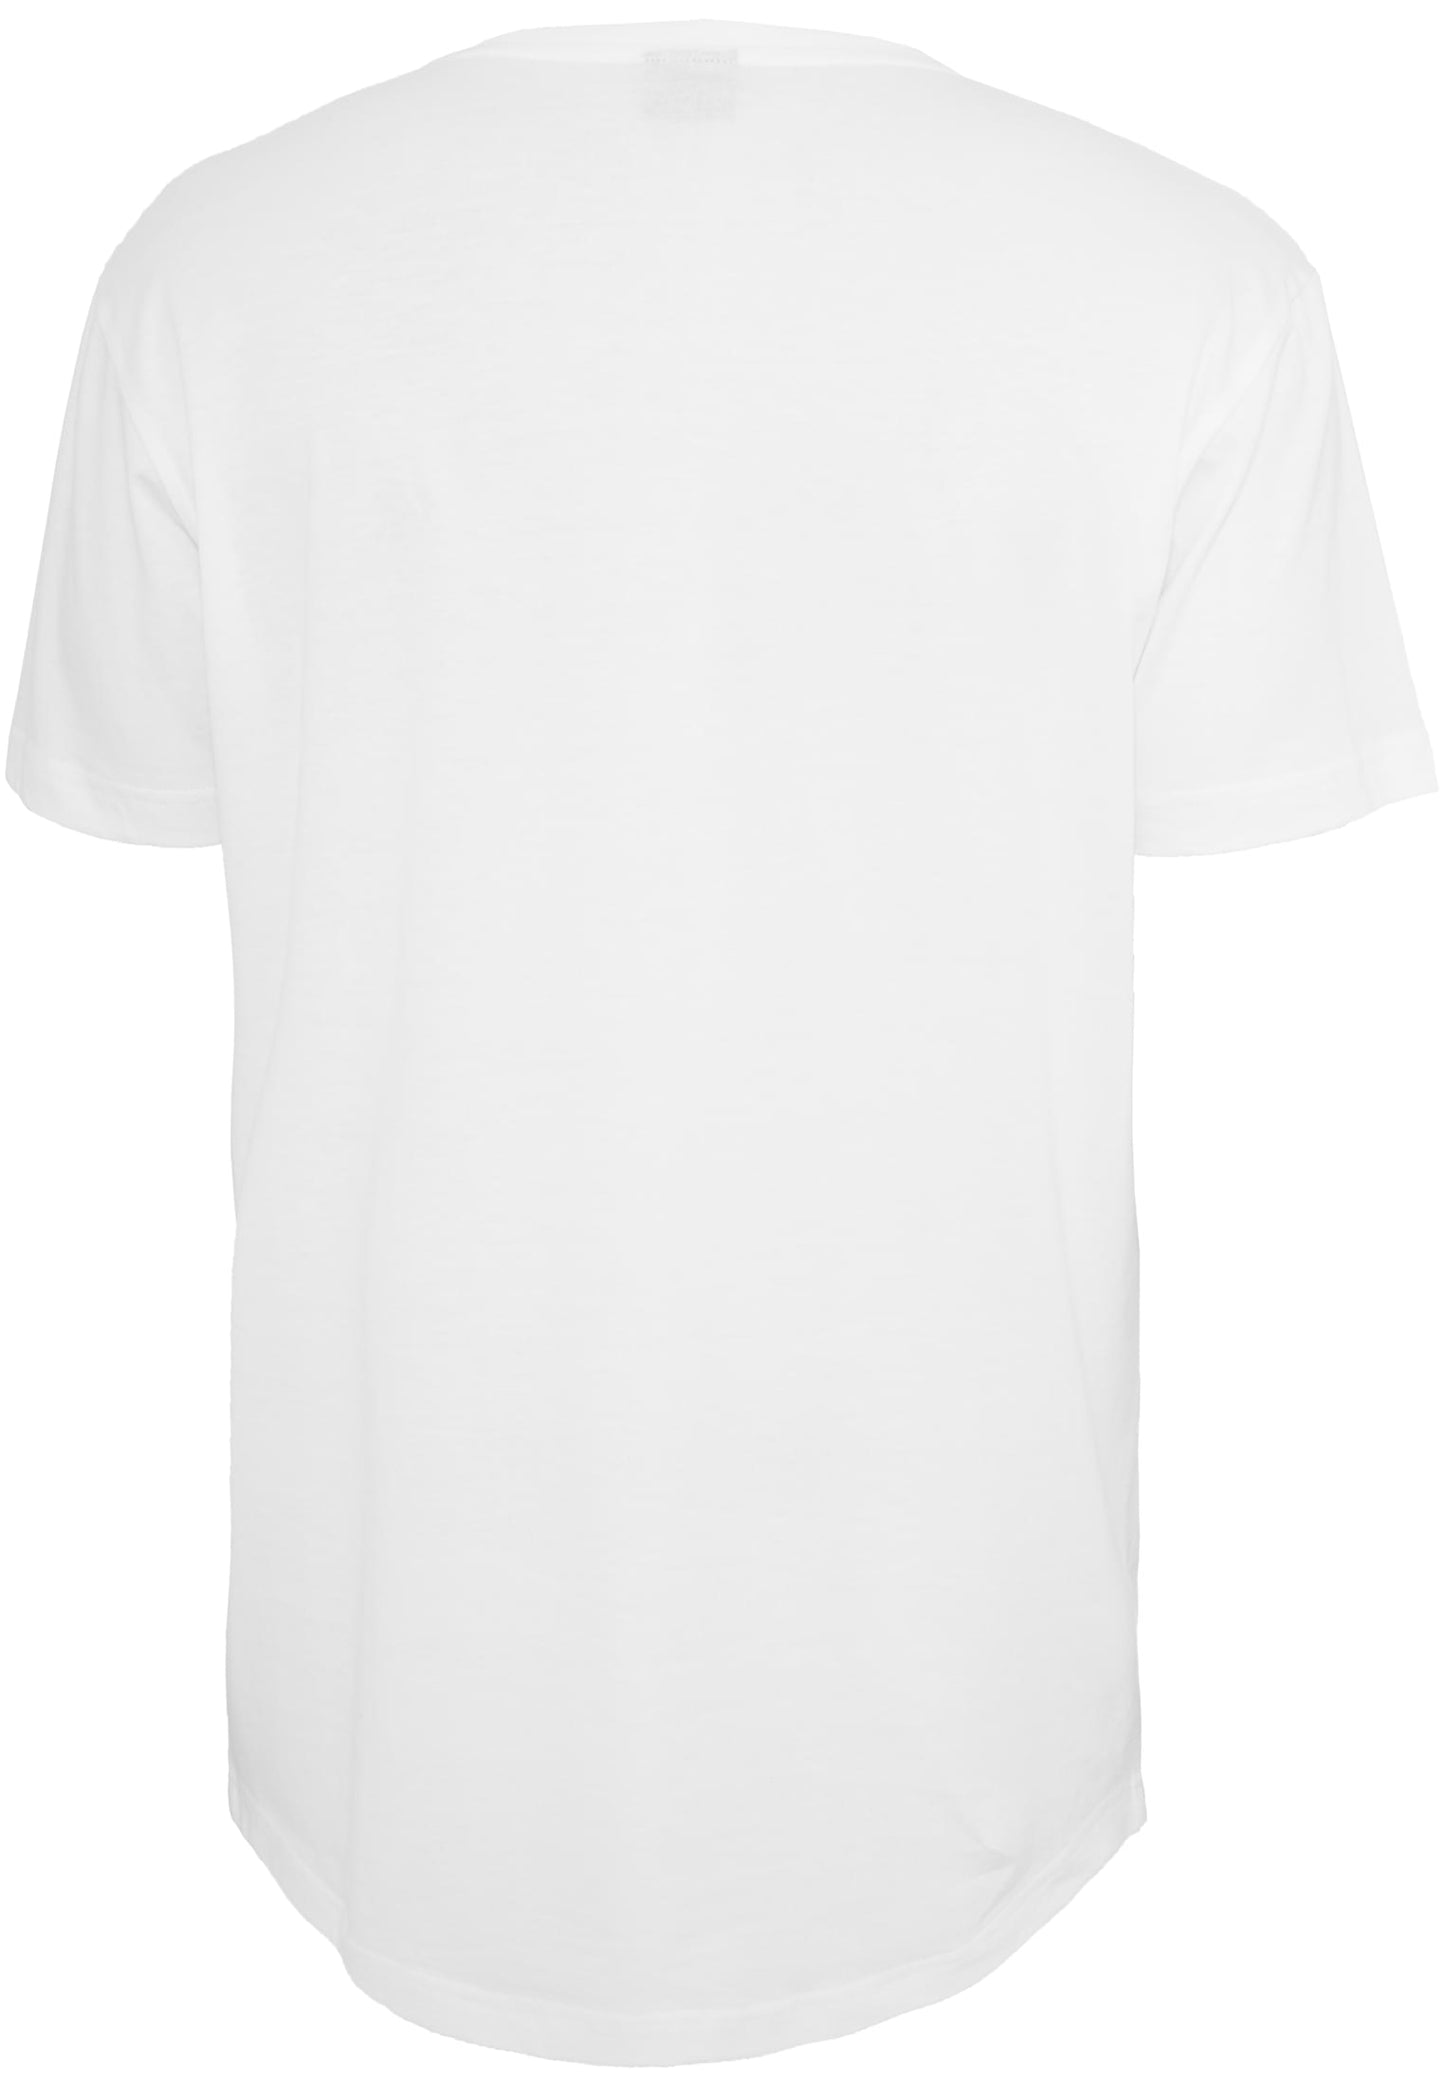 Mister Tee New York Wording Long Shaped T-Shirt white im BAWRZ® One Stop Hip-Hop Shop